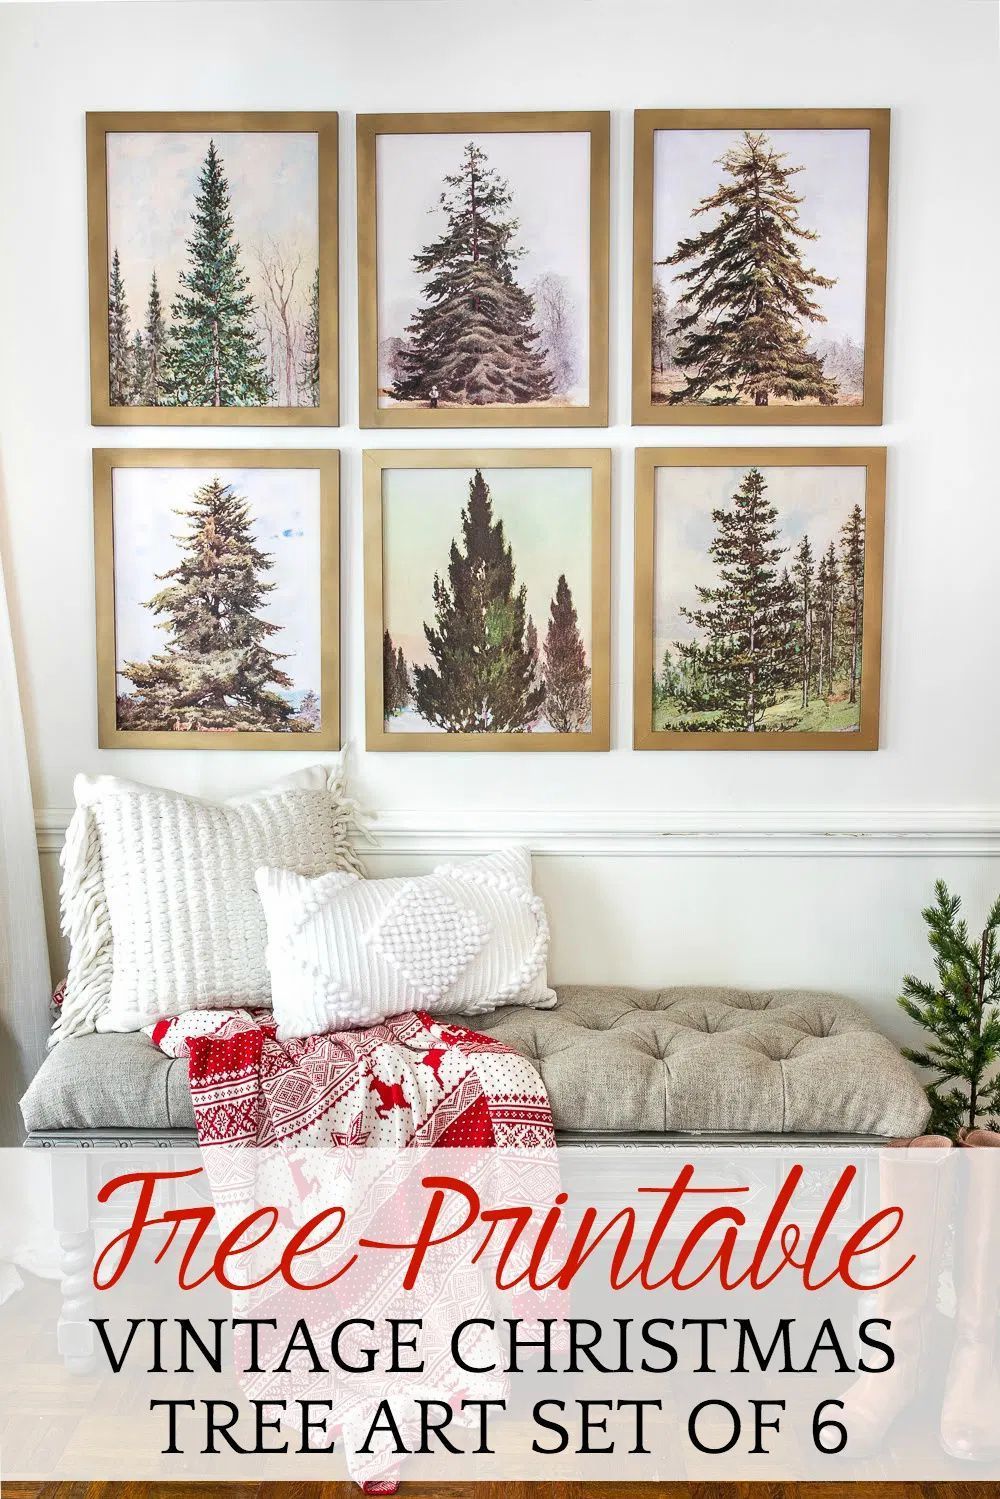 18 diy christmas decorations for home wall ideas